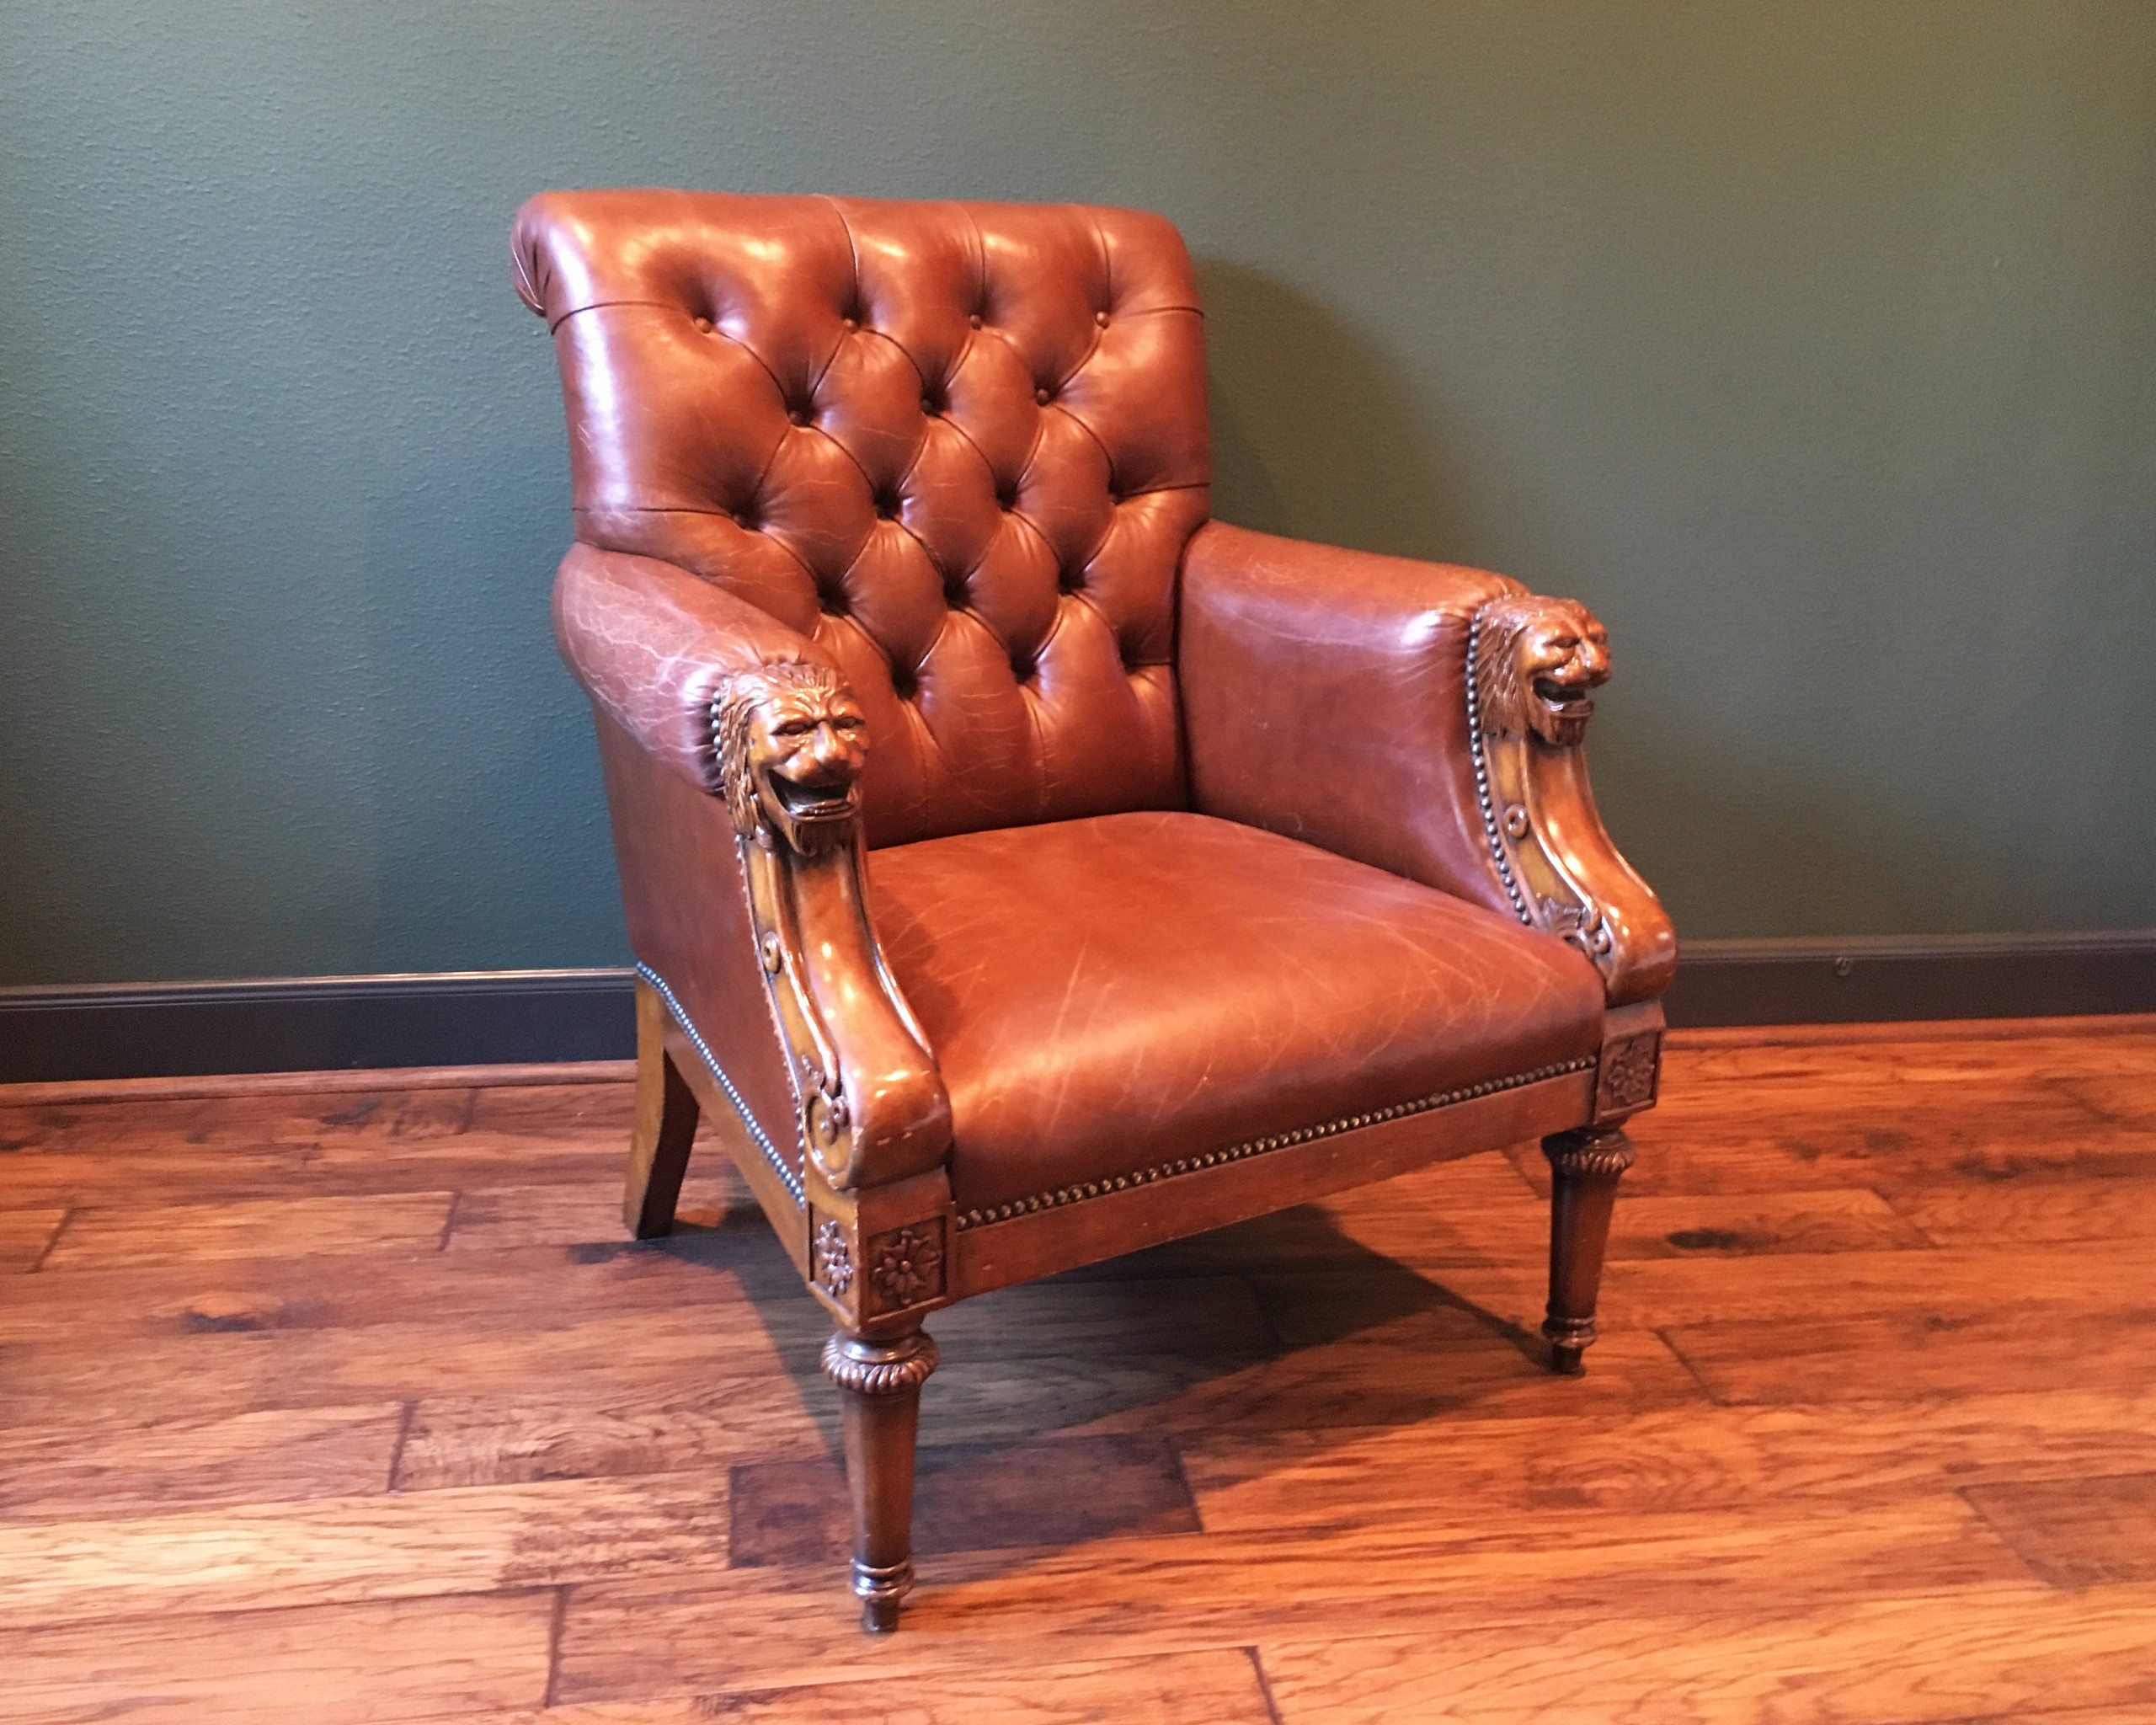 Antique leather chesterfield chair with lion head arms